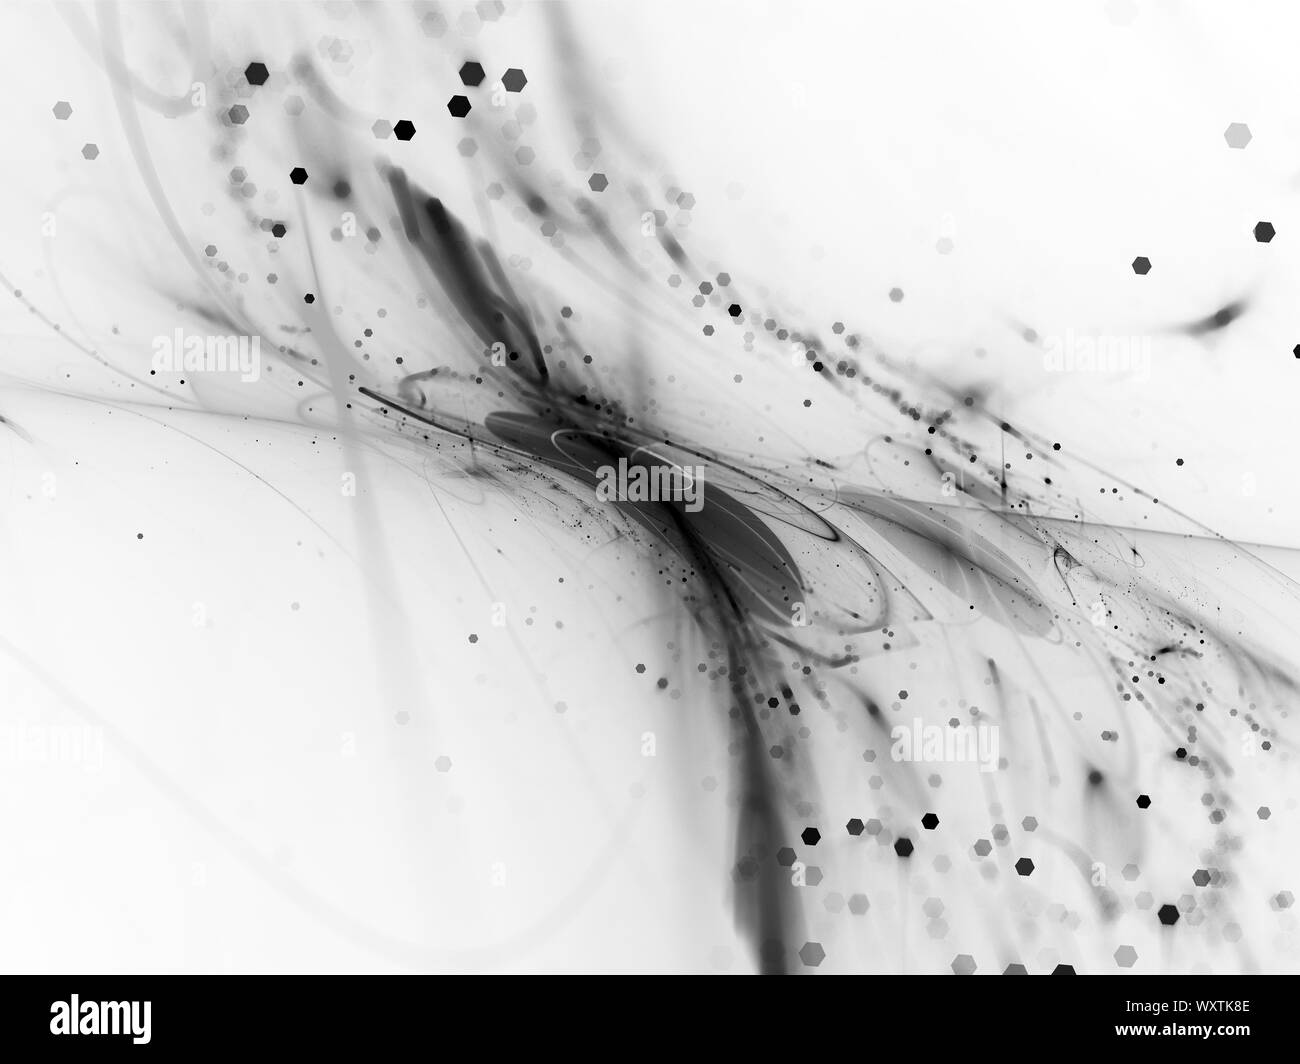 Inverted new technology flow in space black and white overlay, computer generated abstract background Stock Photo